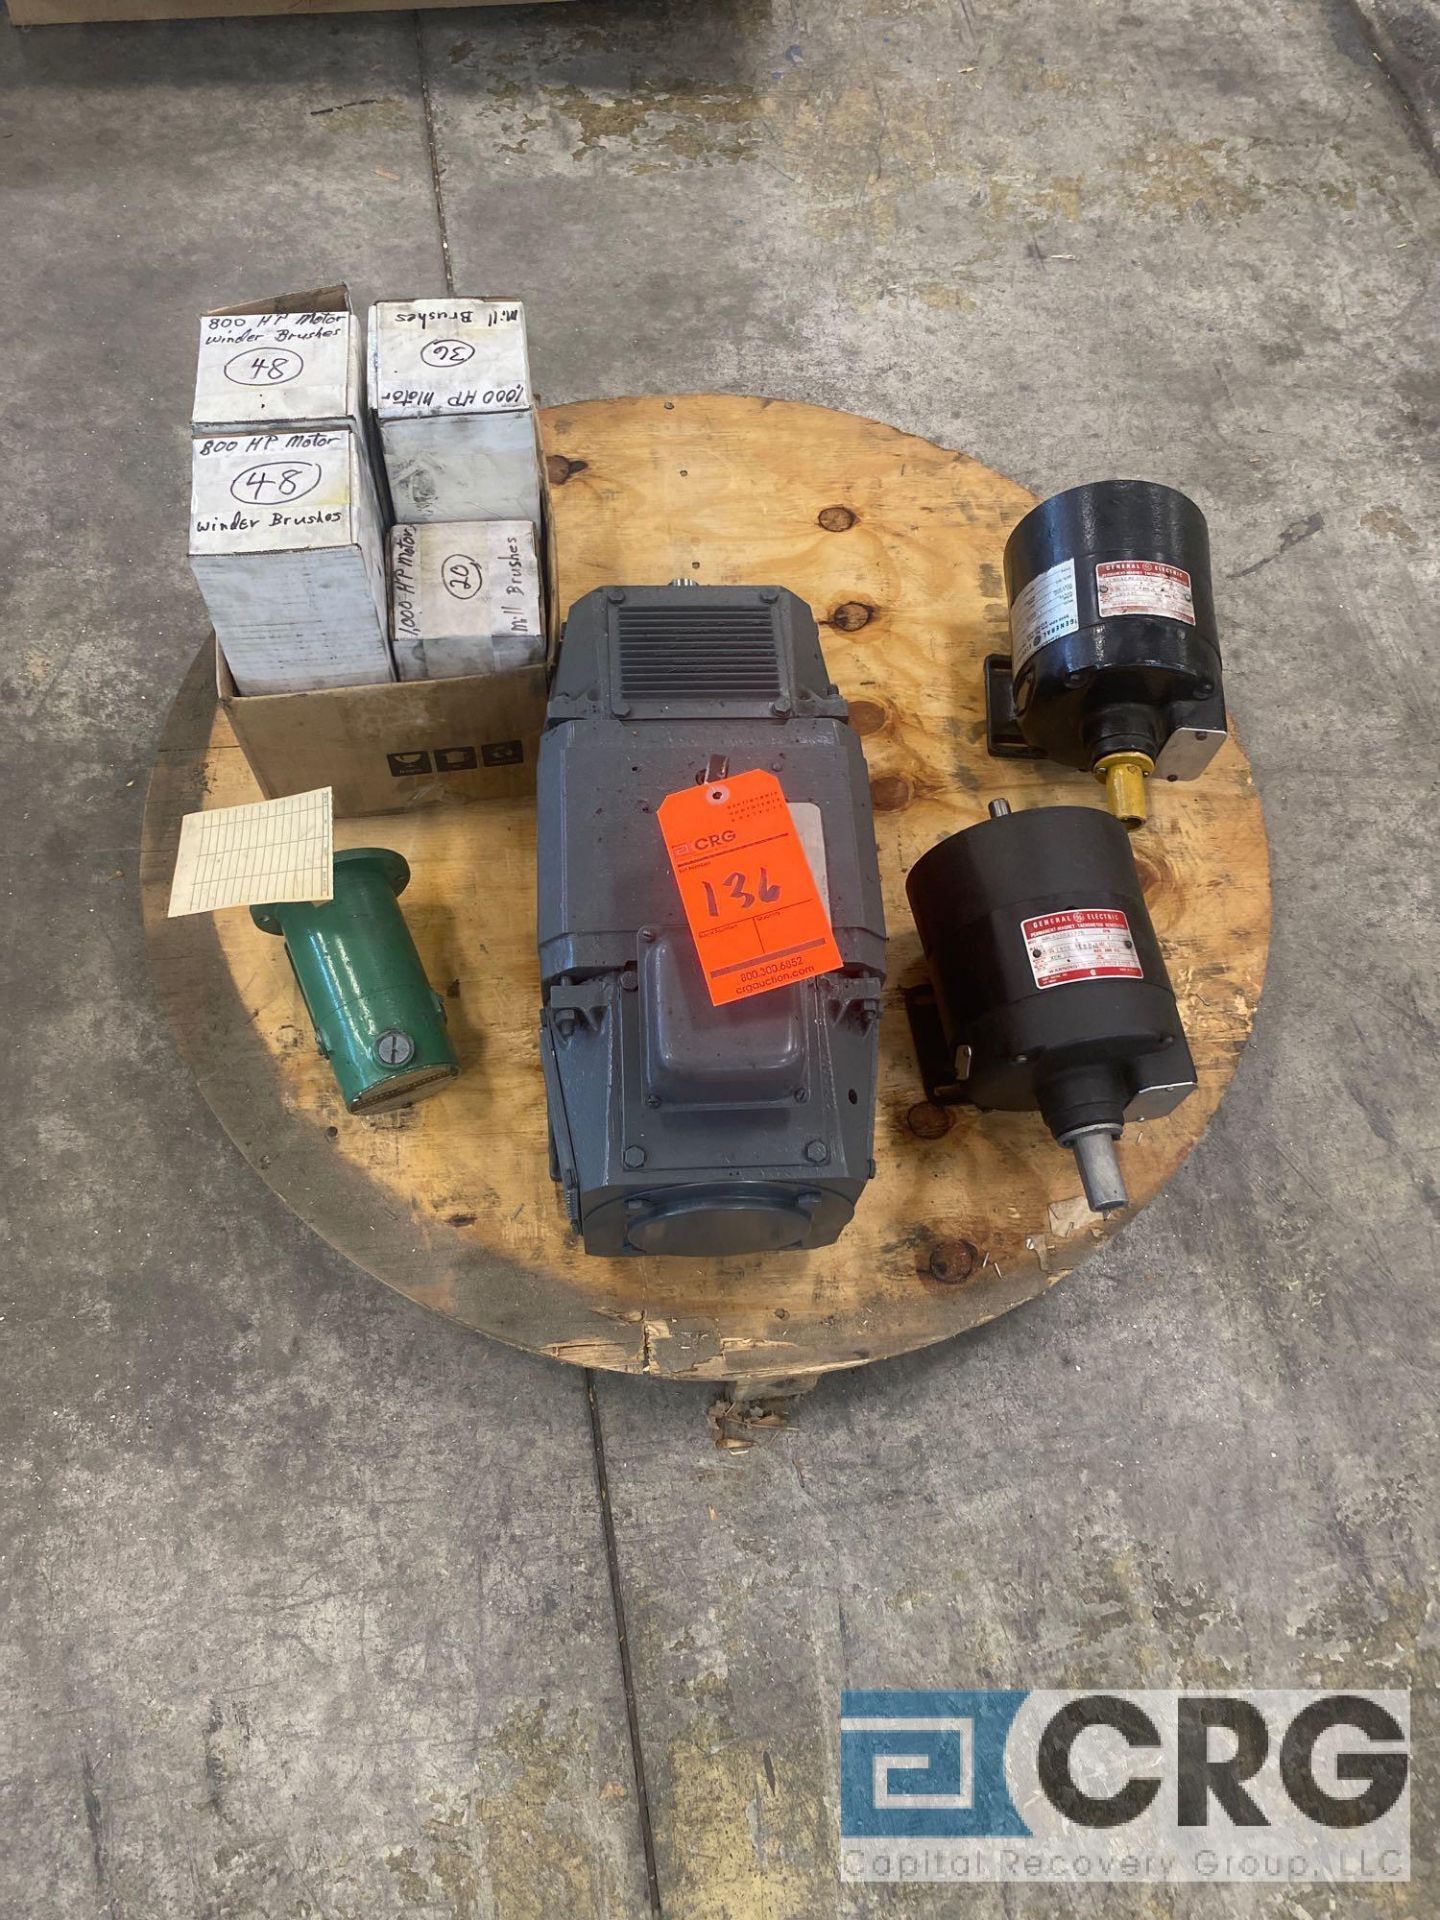 Lot of (5) motors and motor parts, including (1) Reliance 5 HP 1750 RPM DC motor, (1) GE